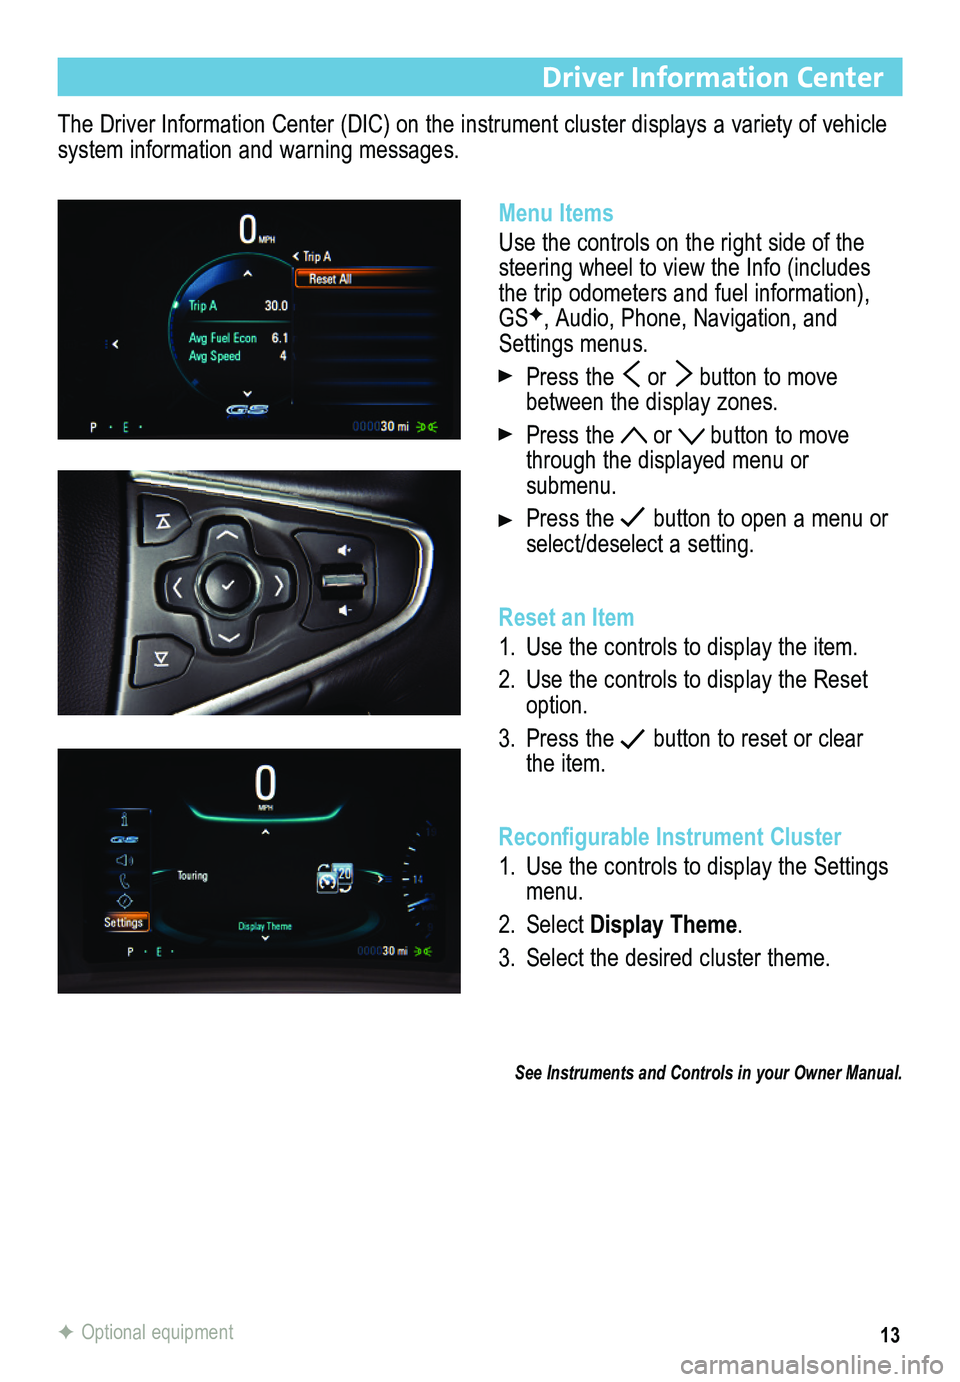 BUICK REGAL 2015  Get To Know Guide 13
The Driver Information Center (DIC) on the instrument cluster displays a variety of vehicle system information and warning messages.
Driver Information Center
Menu Items
Use the controls on the rig